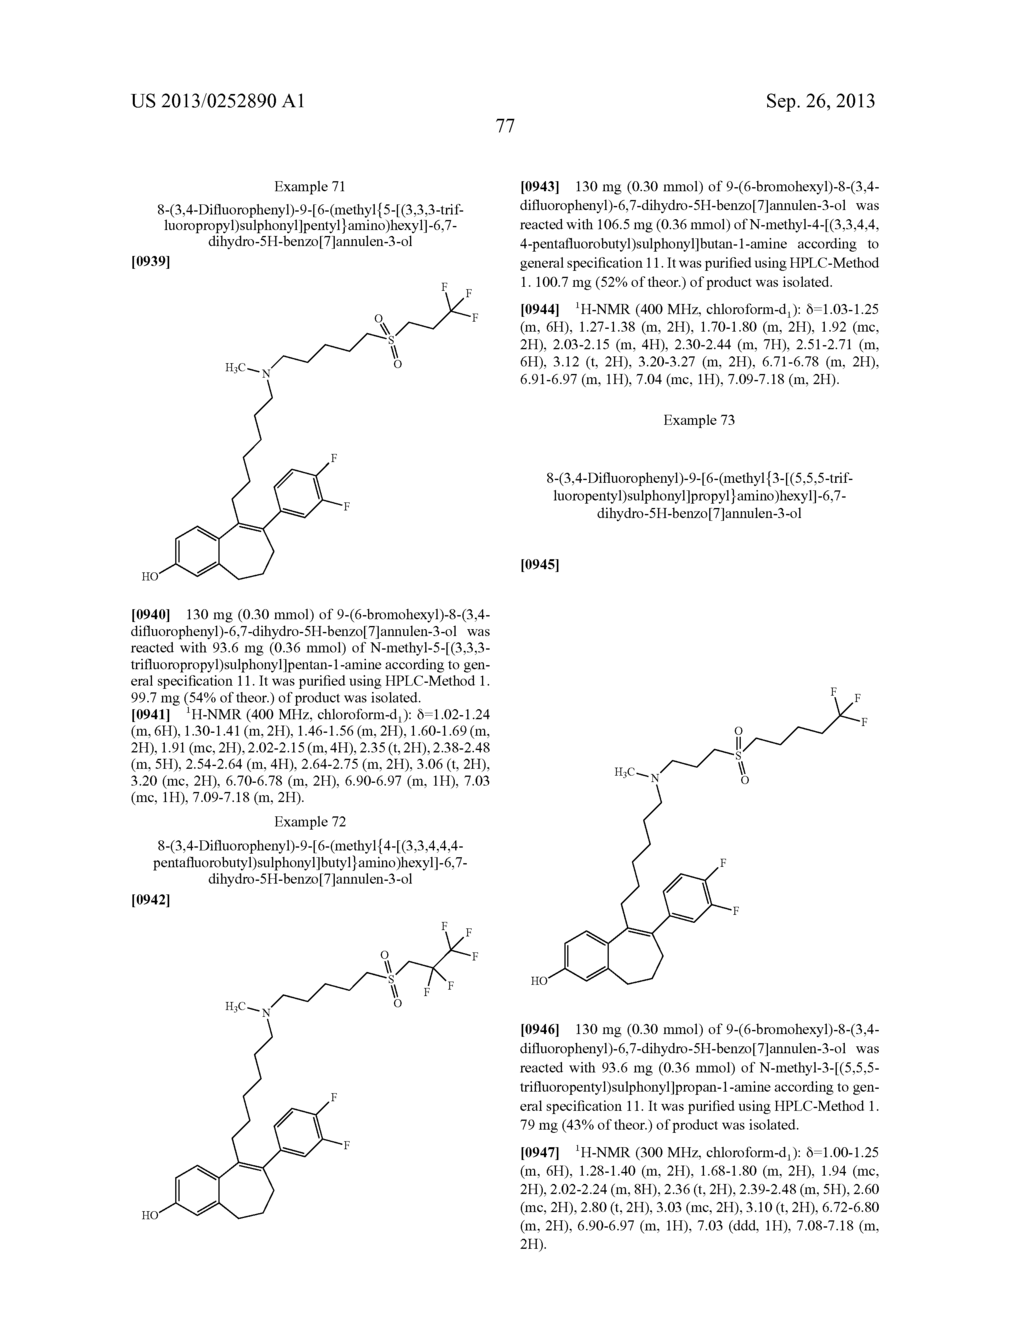 6,7-DIHYDRO-5H-BENZO[7]ANNULENE DERIVATIVES, PROCESS FOR PREPARATION     THEREOF, PHARMACEUTICAL PREPARATIONS COMPRISING THEM, AND THE USE THEREOF     FOR PRODUCTION OF MEDICAMENTS - diagram, schematic, and image 85